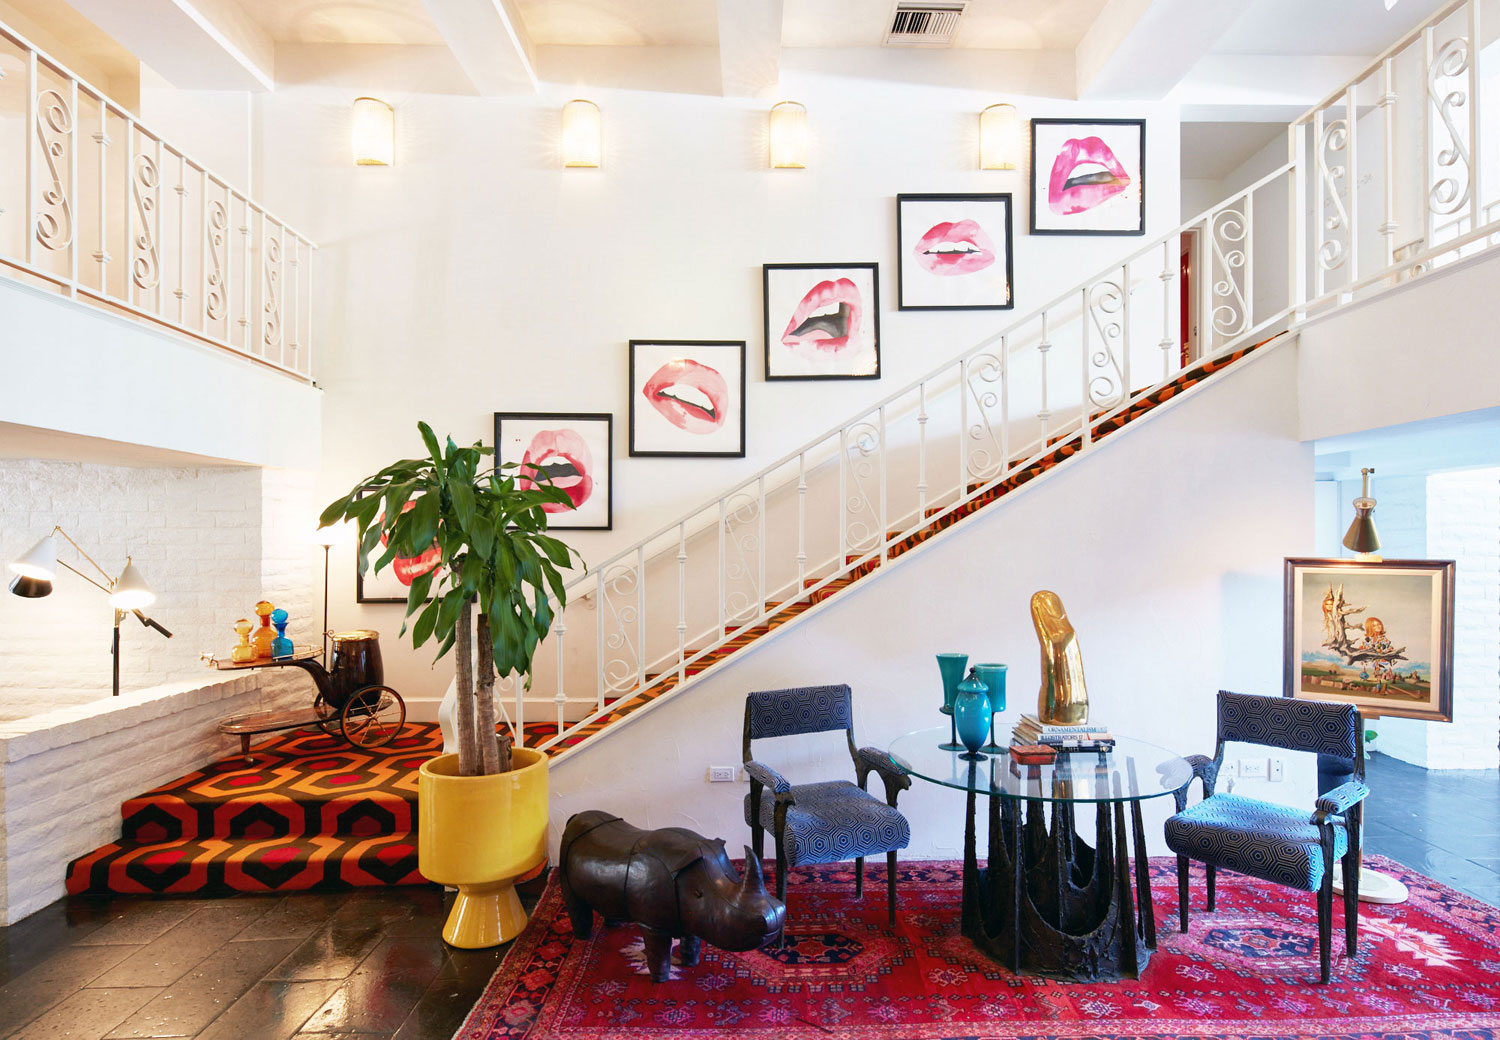 staircase with geometric carpet, framed lip artwork along wall, sitting area with leather rhino